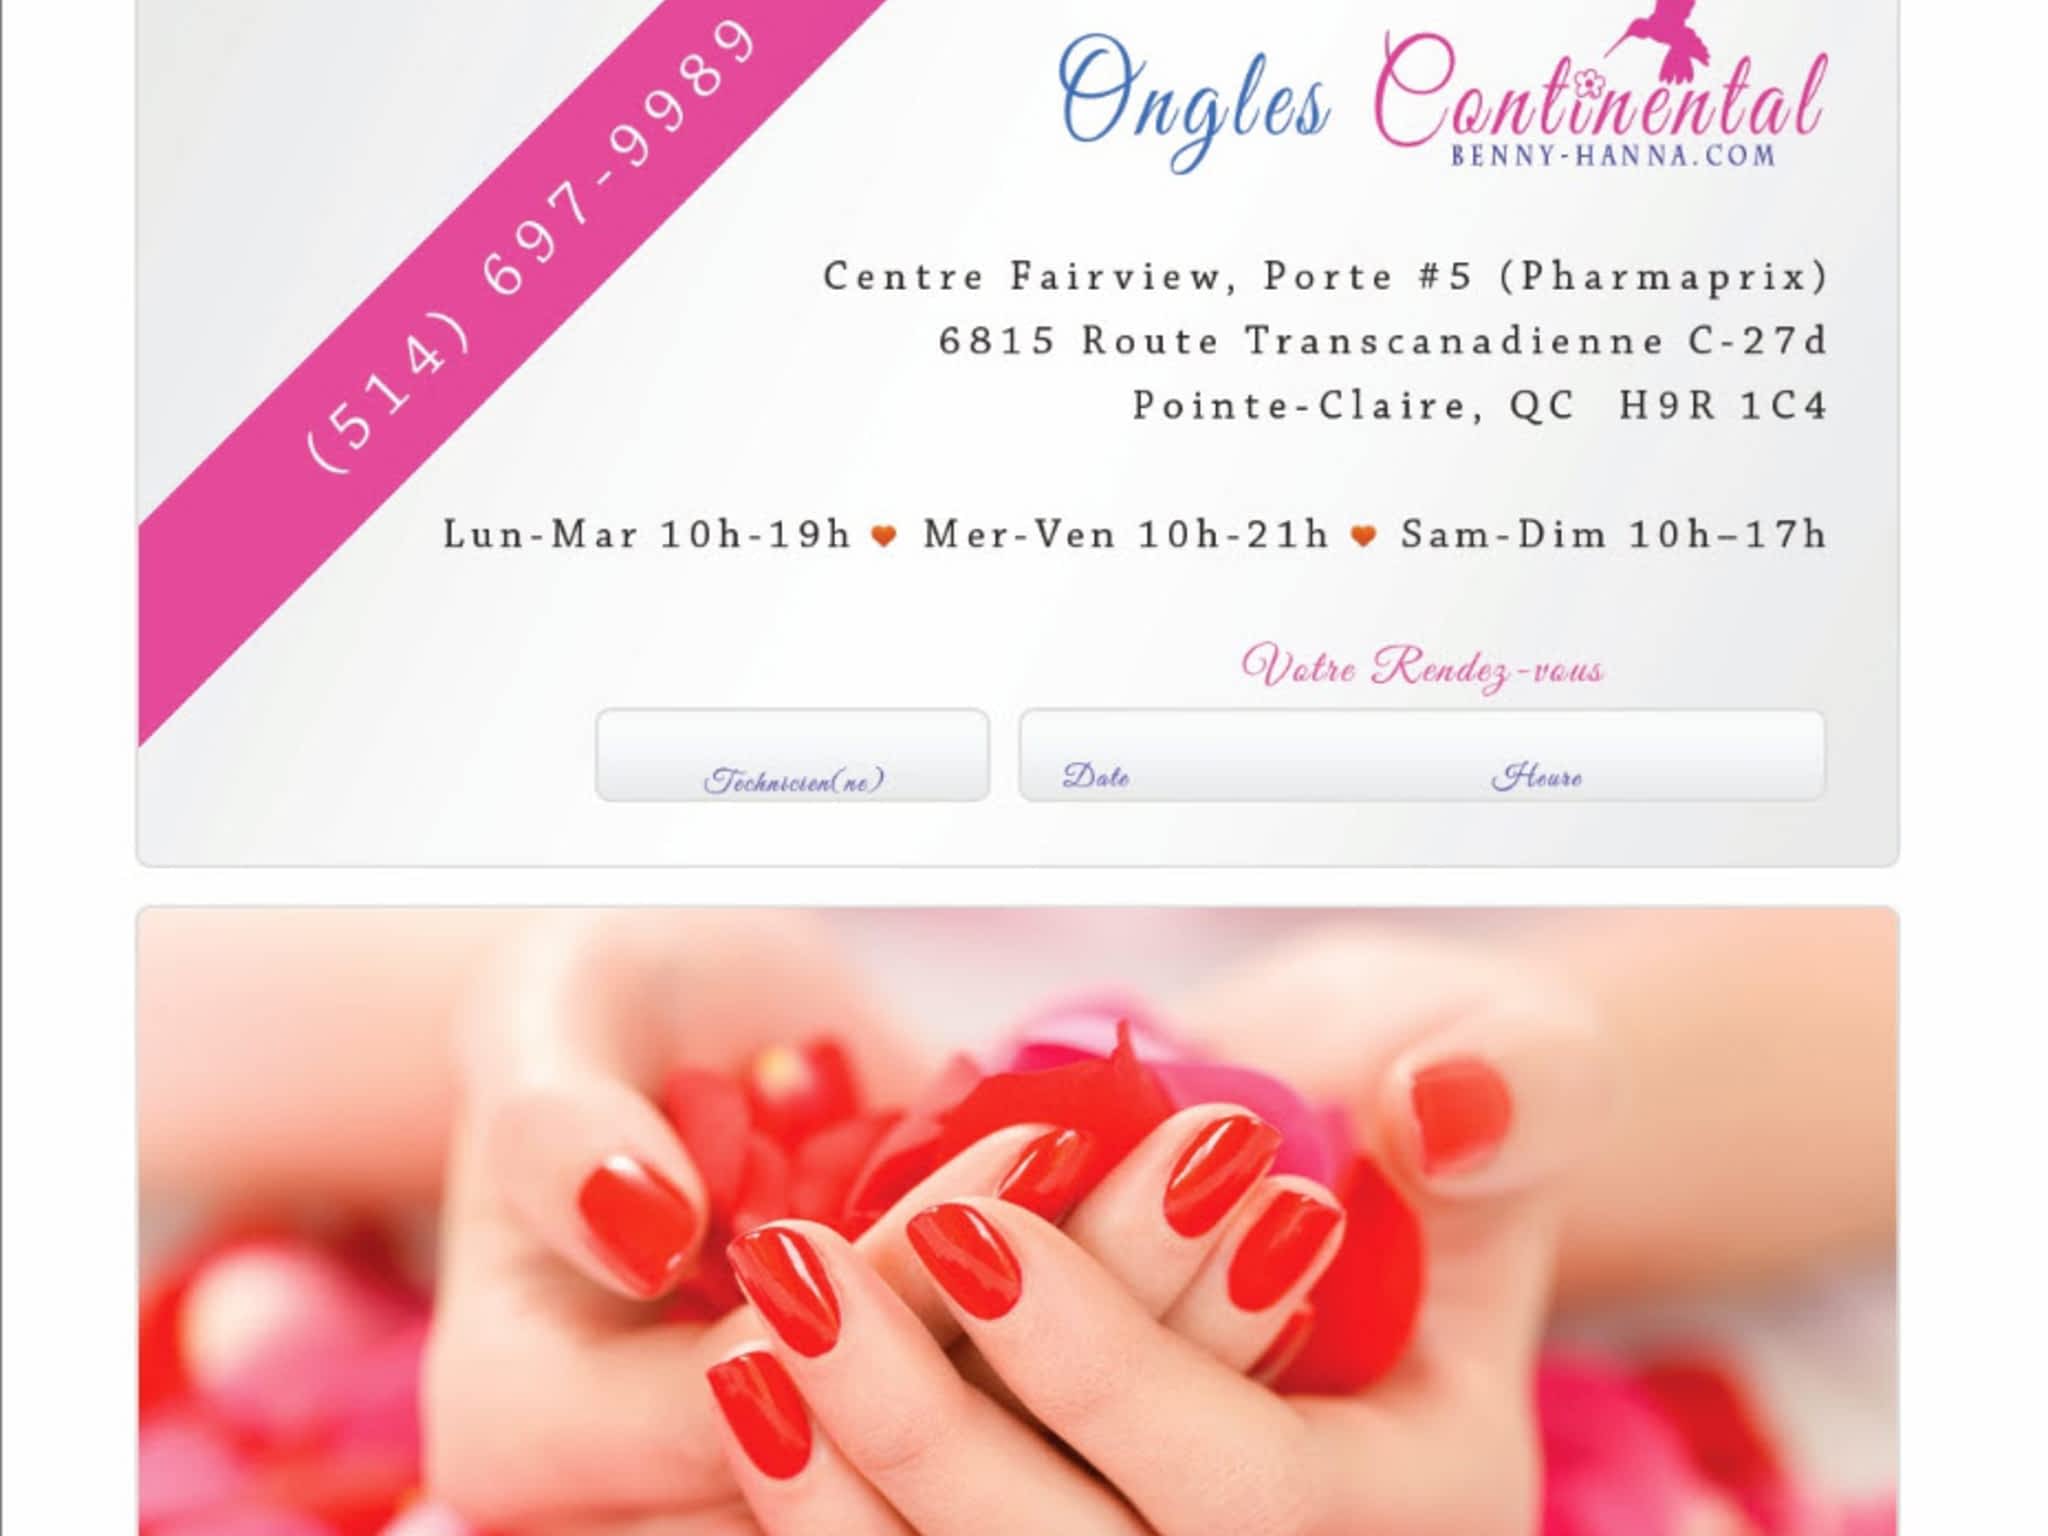 photo Ongles Continental Fairview